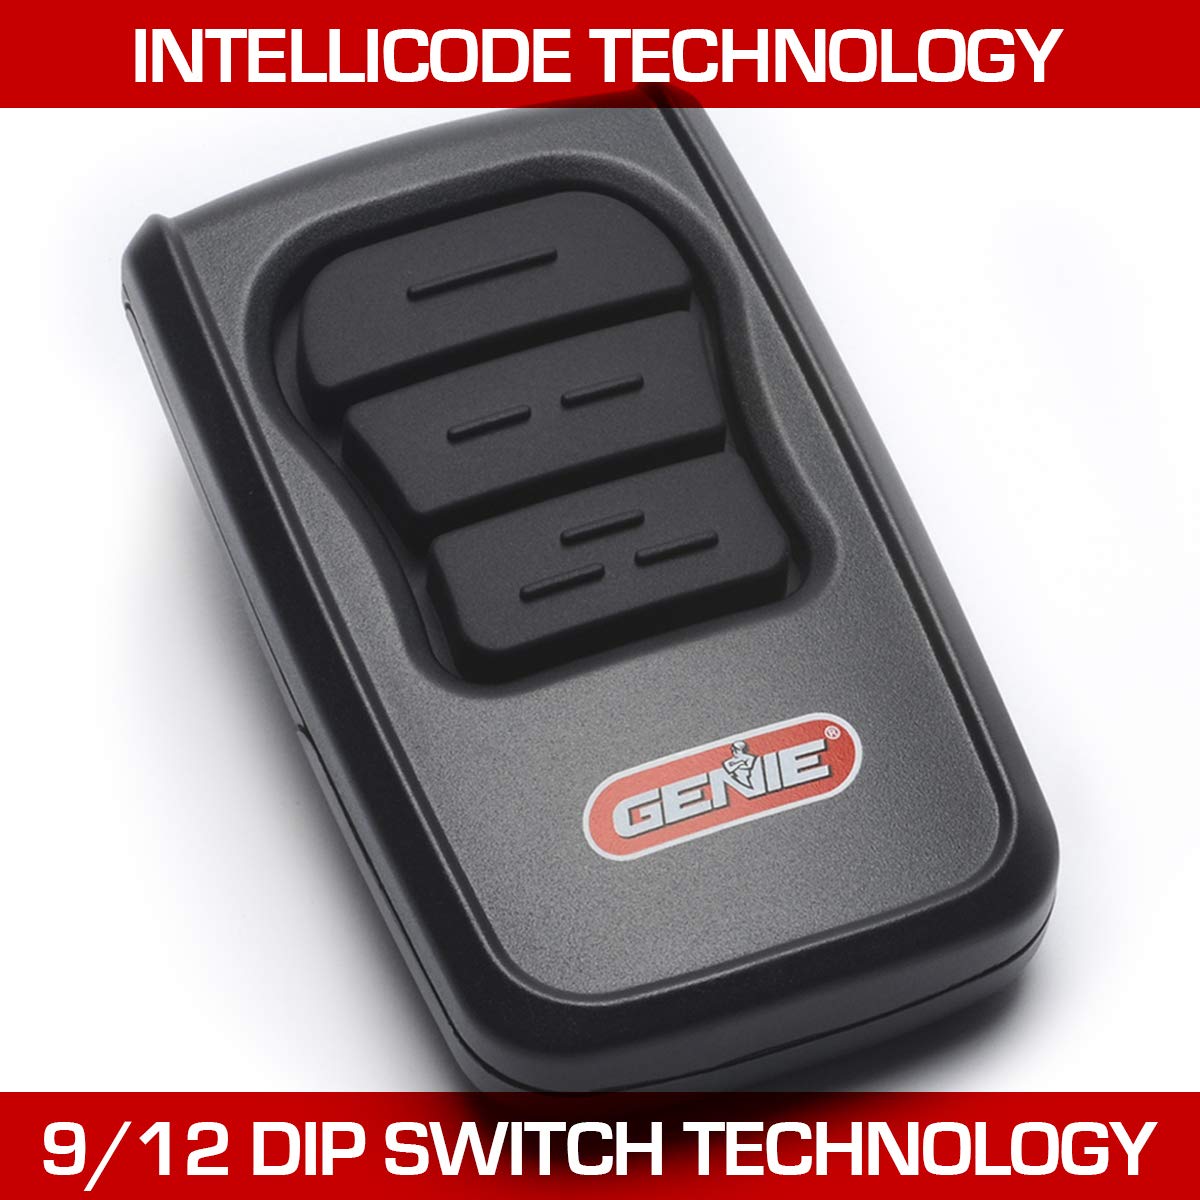 Genie three button master remote works on dip switch technology and intellicode technology